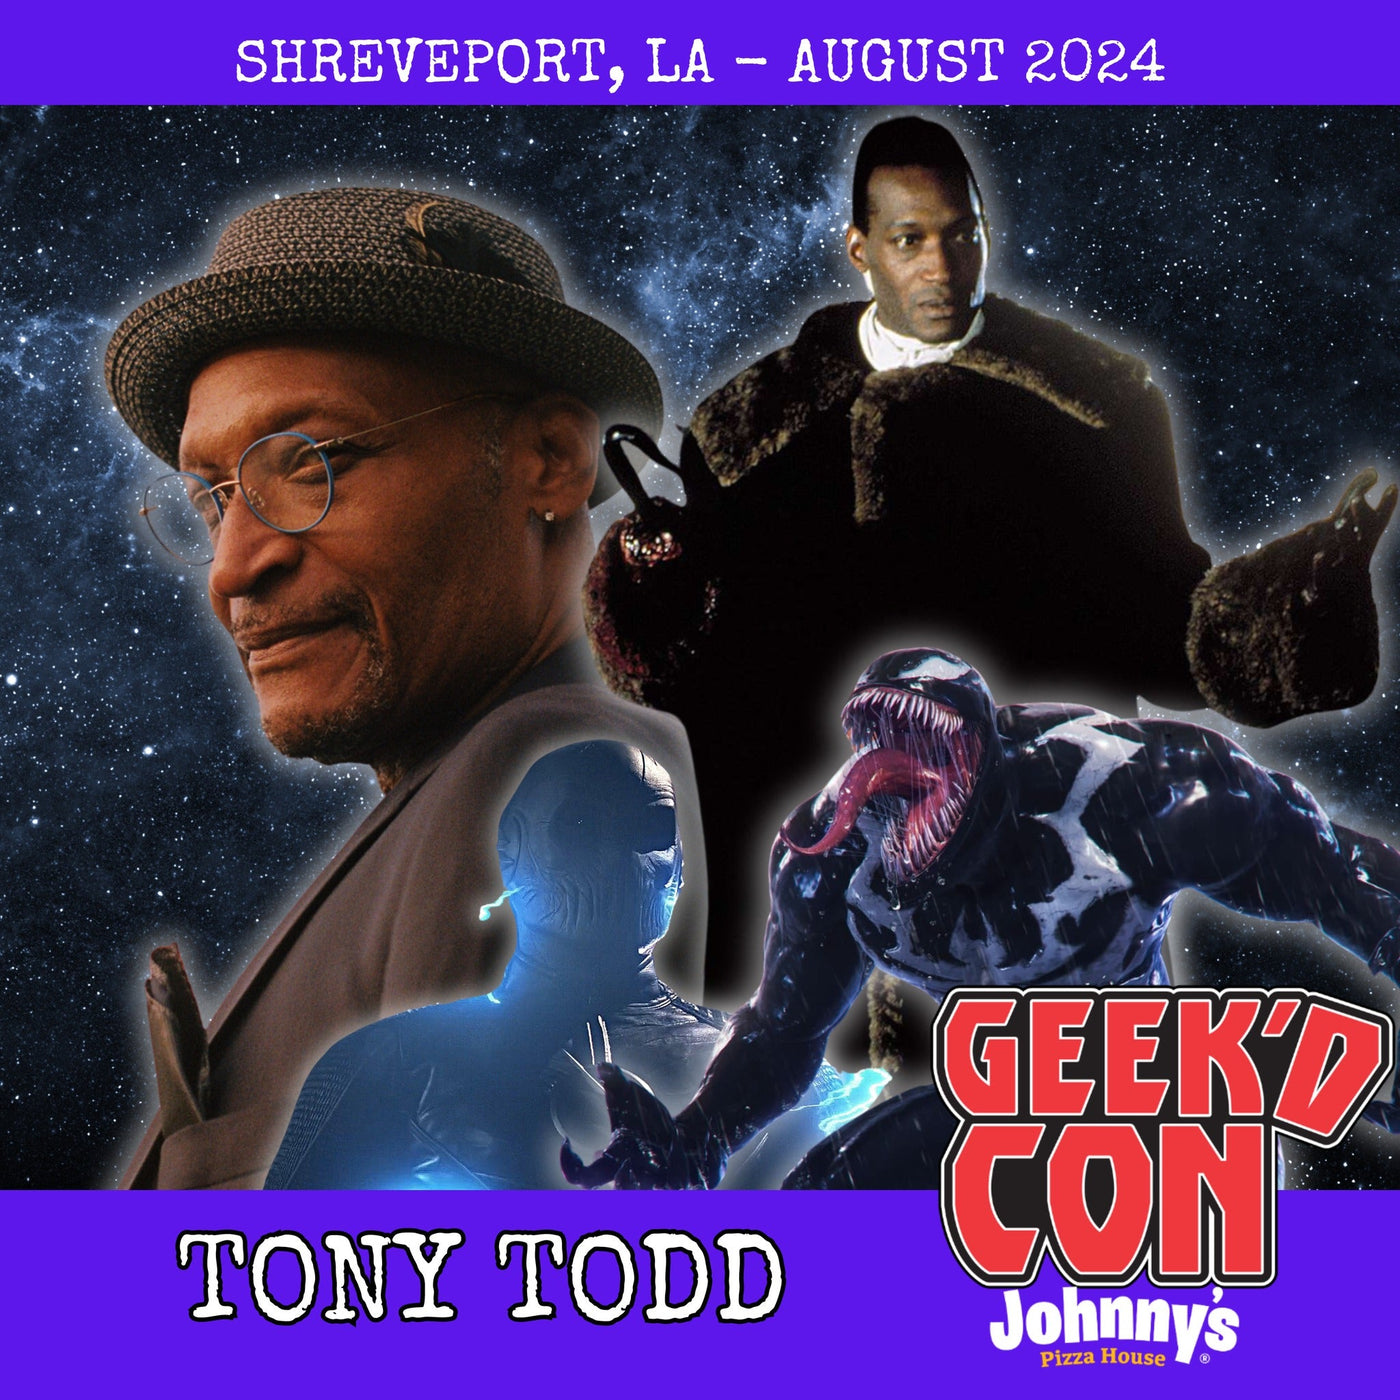 Tony Todd Official Autograph Mail-In Service - Geek'd Con 2024